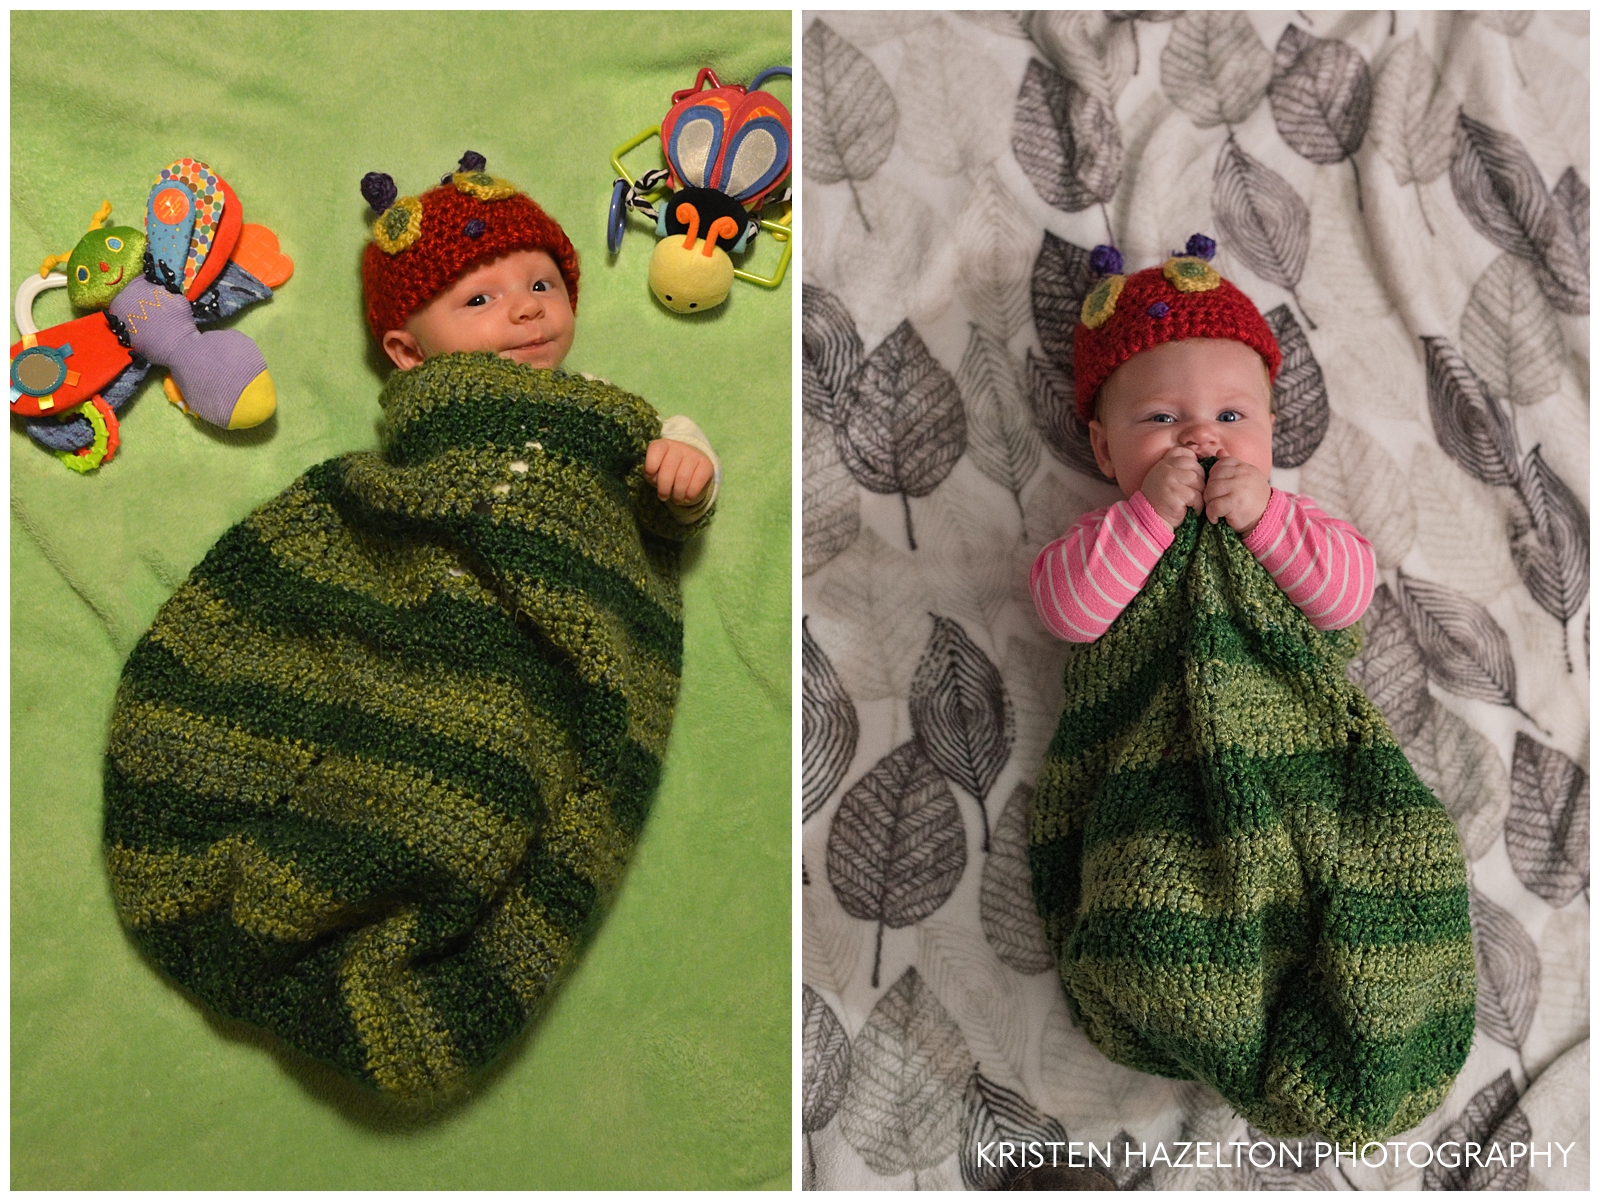 Big brother and baby sister each wearing a Very Hungry Caterpillar sleep sack years apart